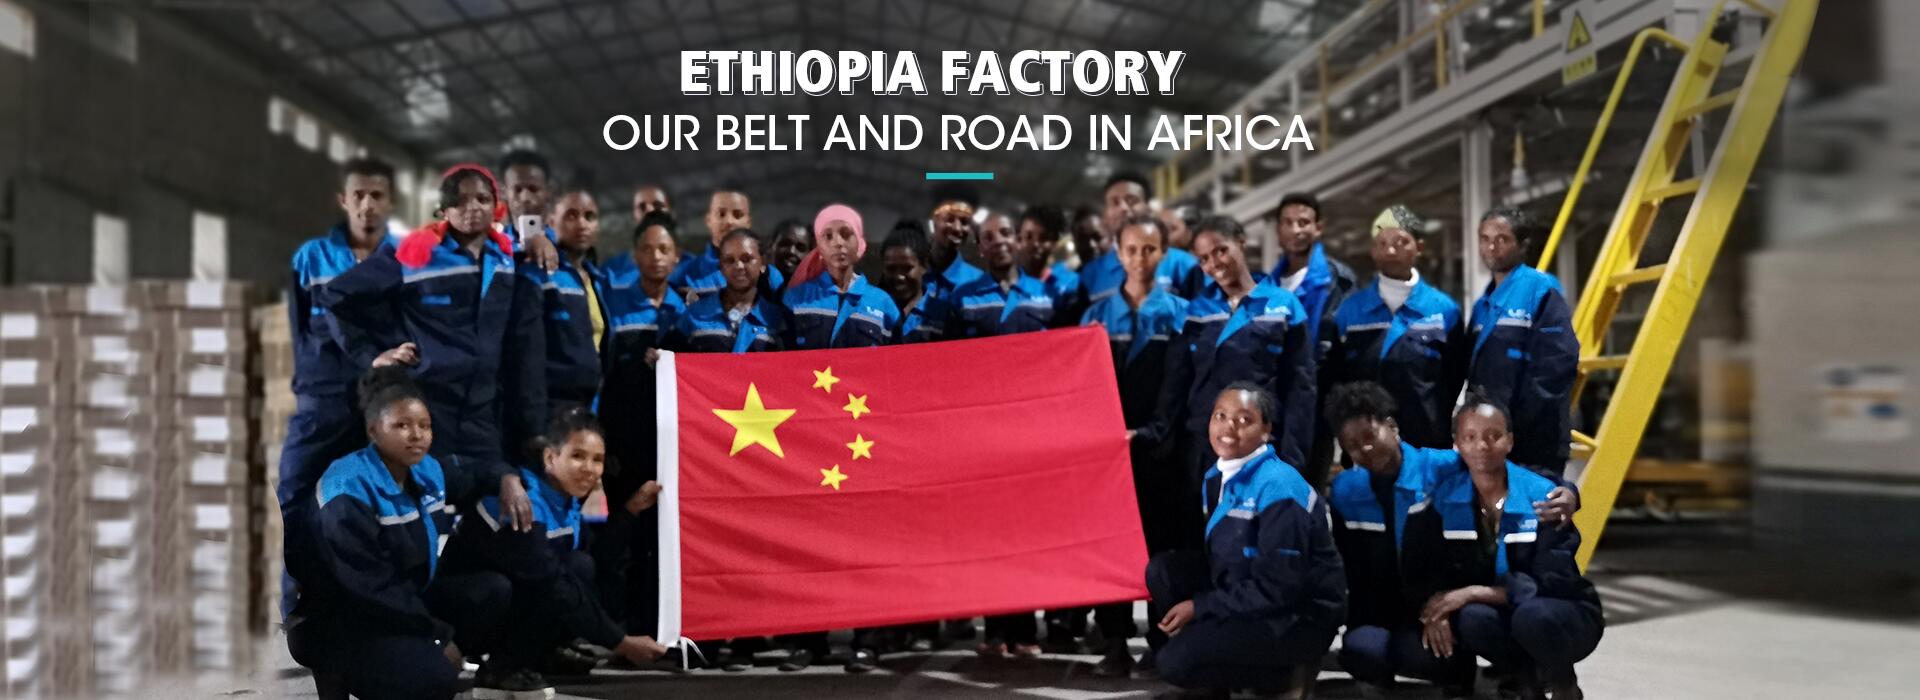 Our Belt and road in Africa